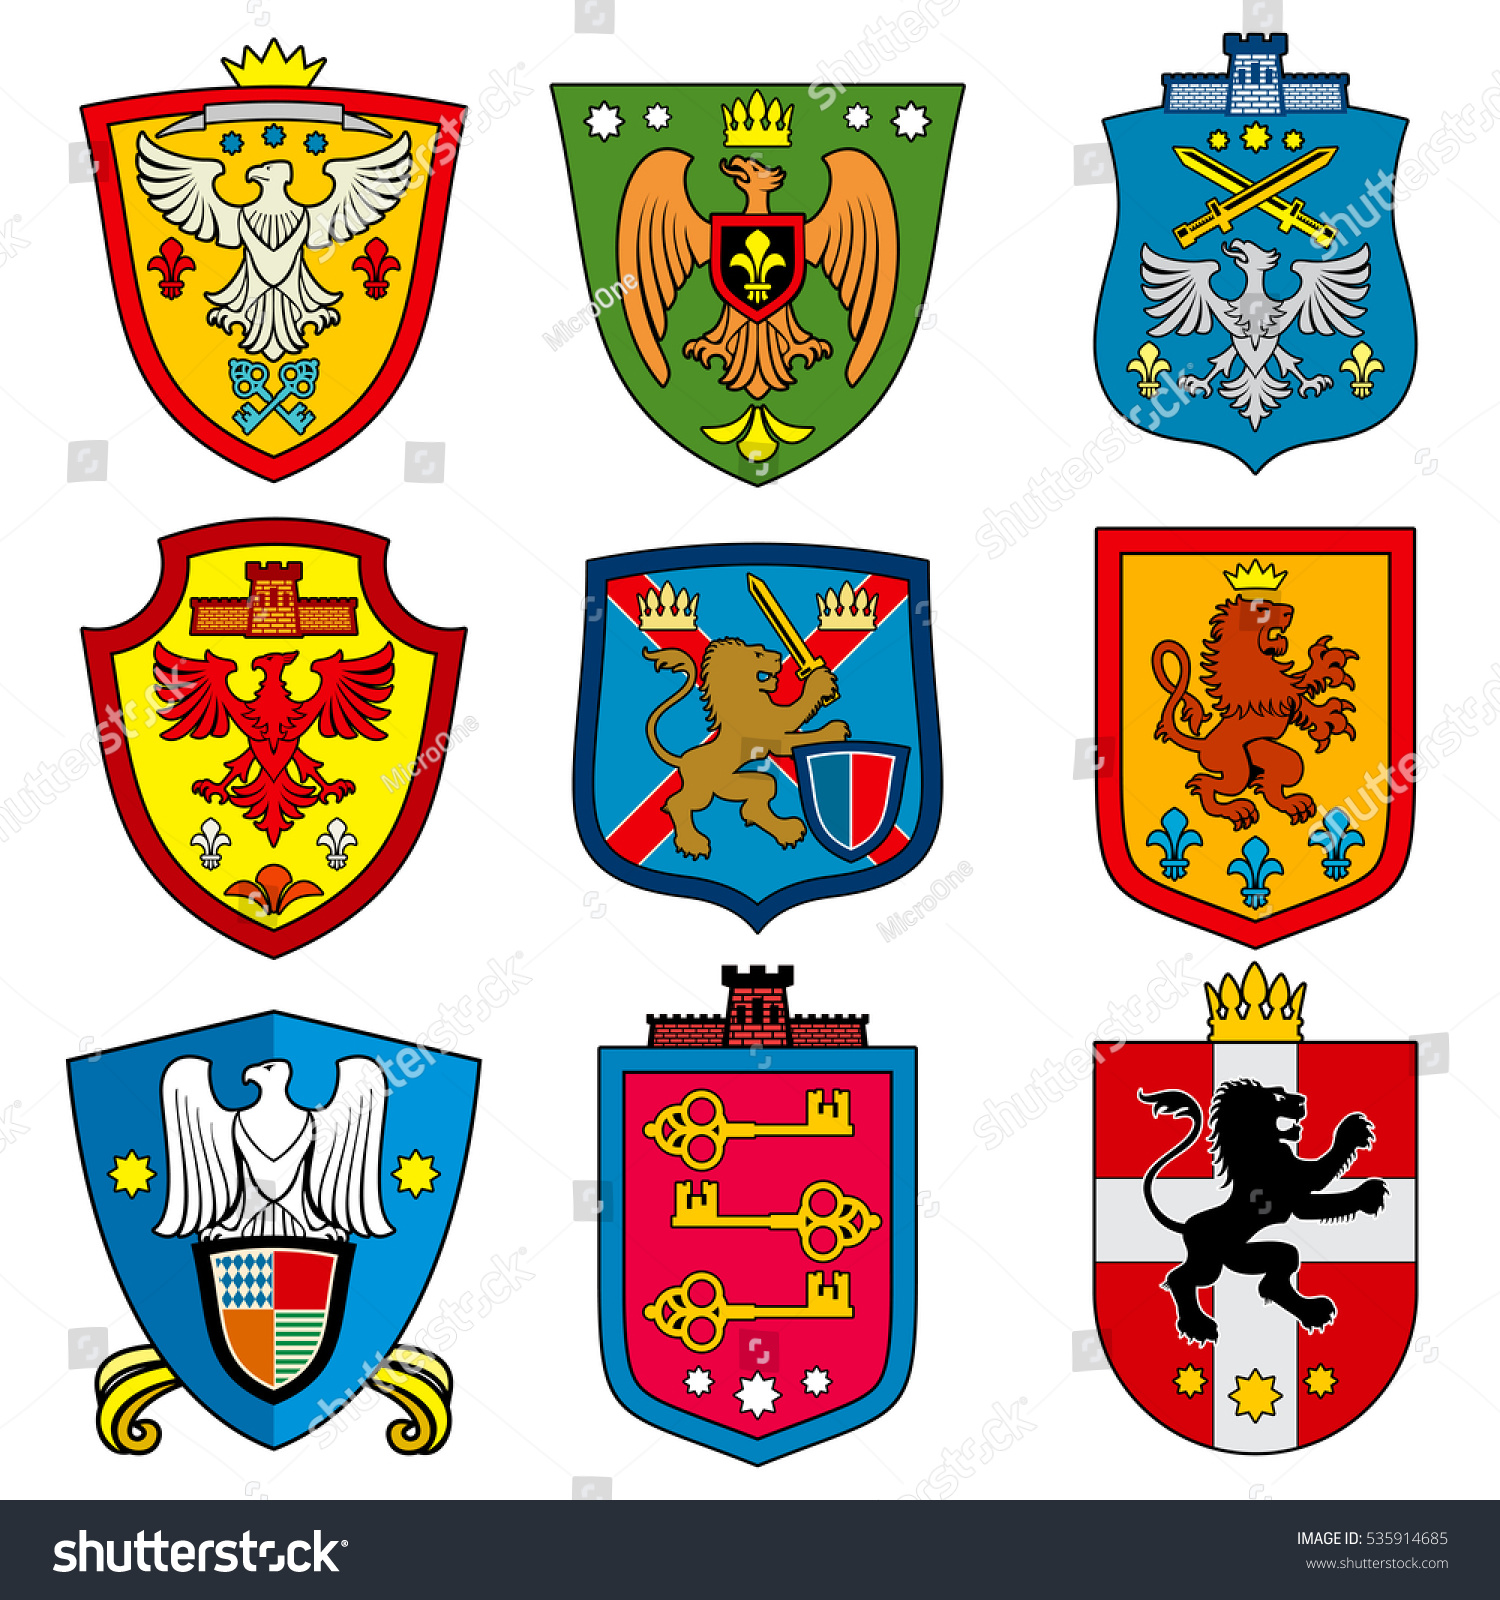 Family Dynasty Medieval Royal Coat Arms Stock Vector (Royalty Free ...